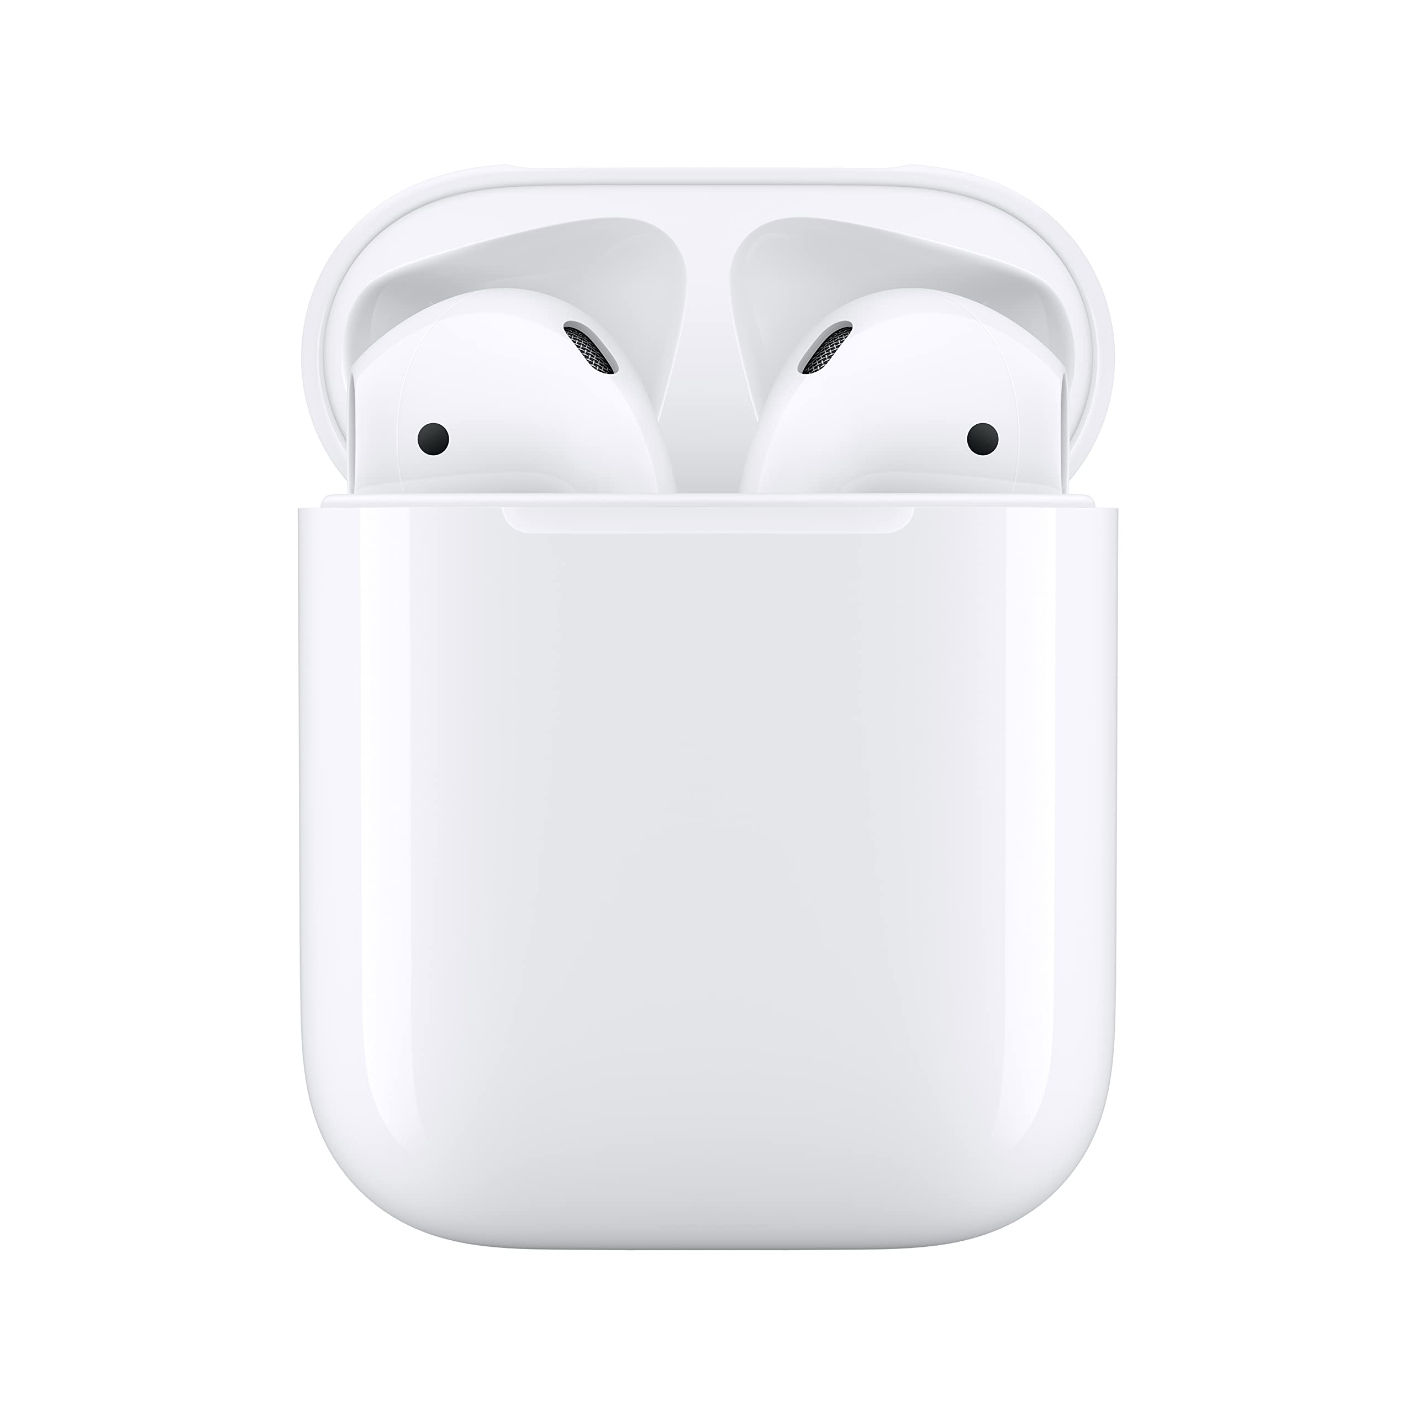 for Apple AirPods (2nd Generation) Wireless Earbuds with Lightning Charging Case Included. Over 24 Hours of Battery Life, Effortless Setup. Bluetooth Headphones for iPhone